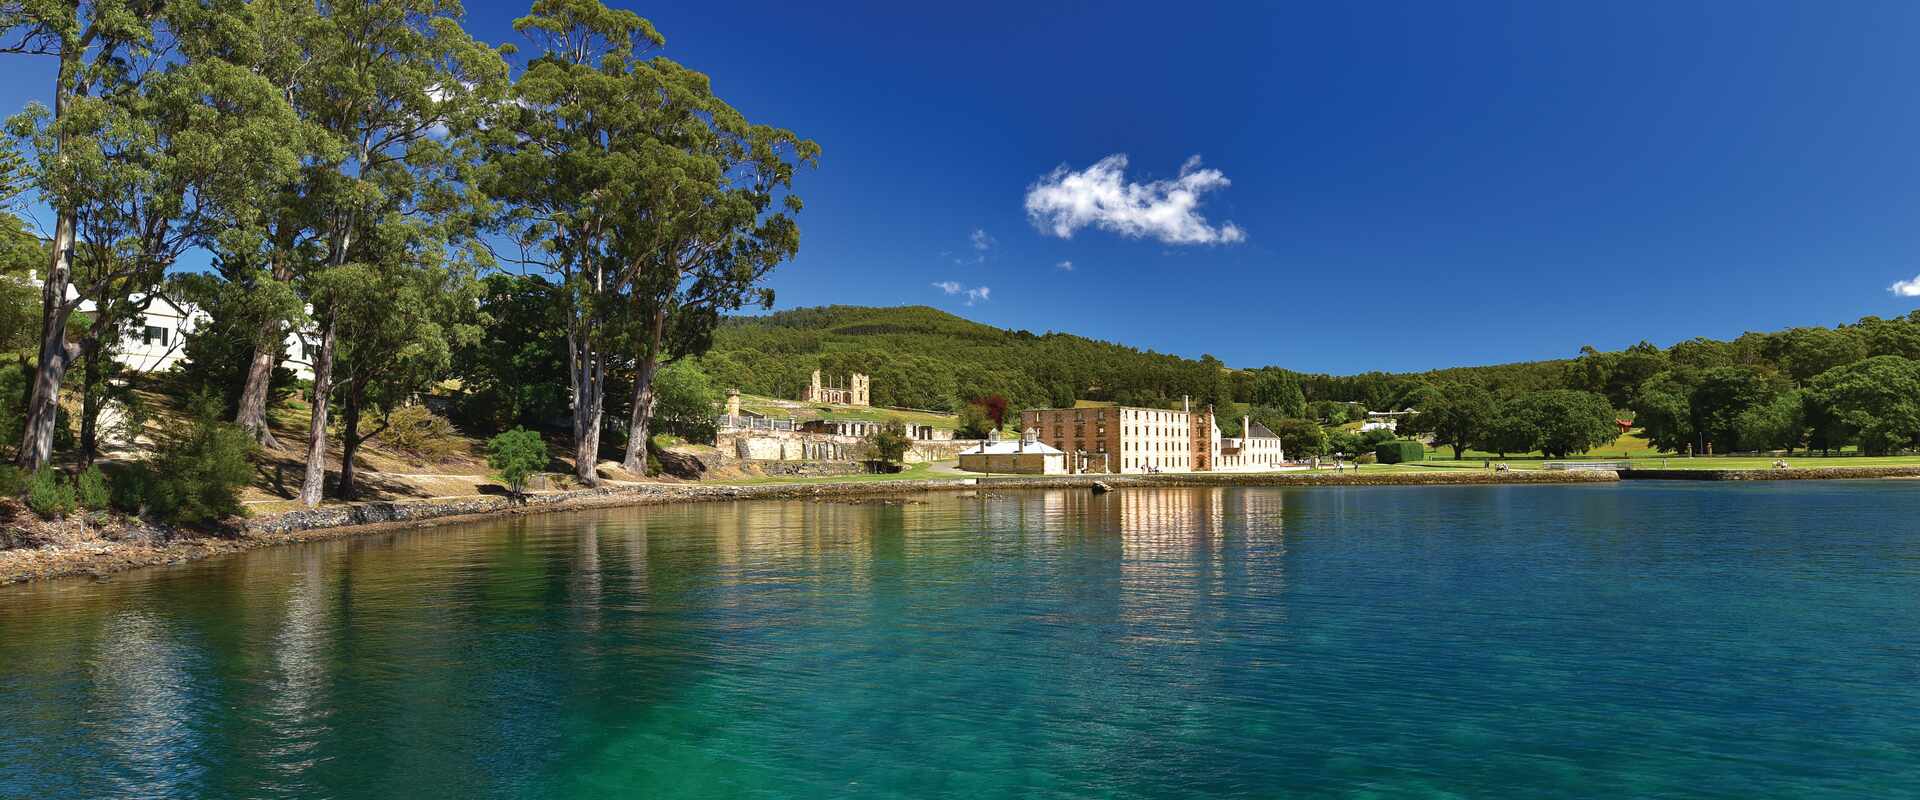 View of Port Arthur from harbour, Tasmania